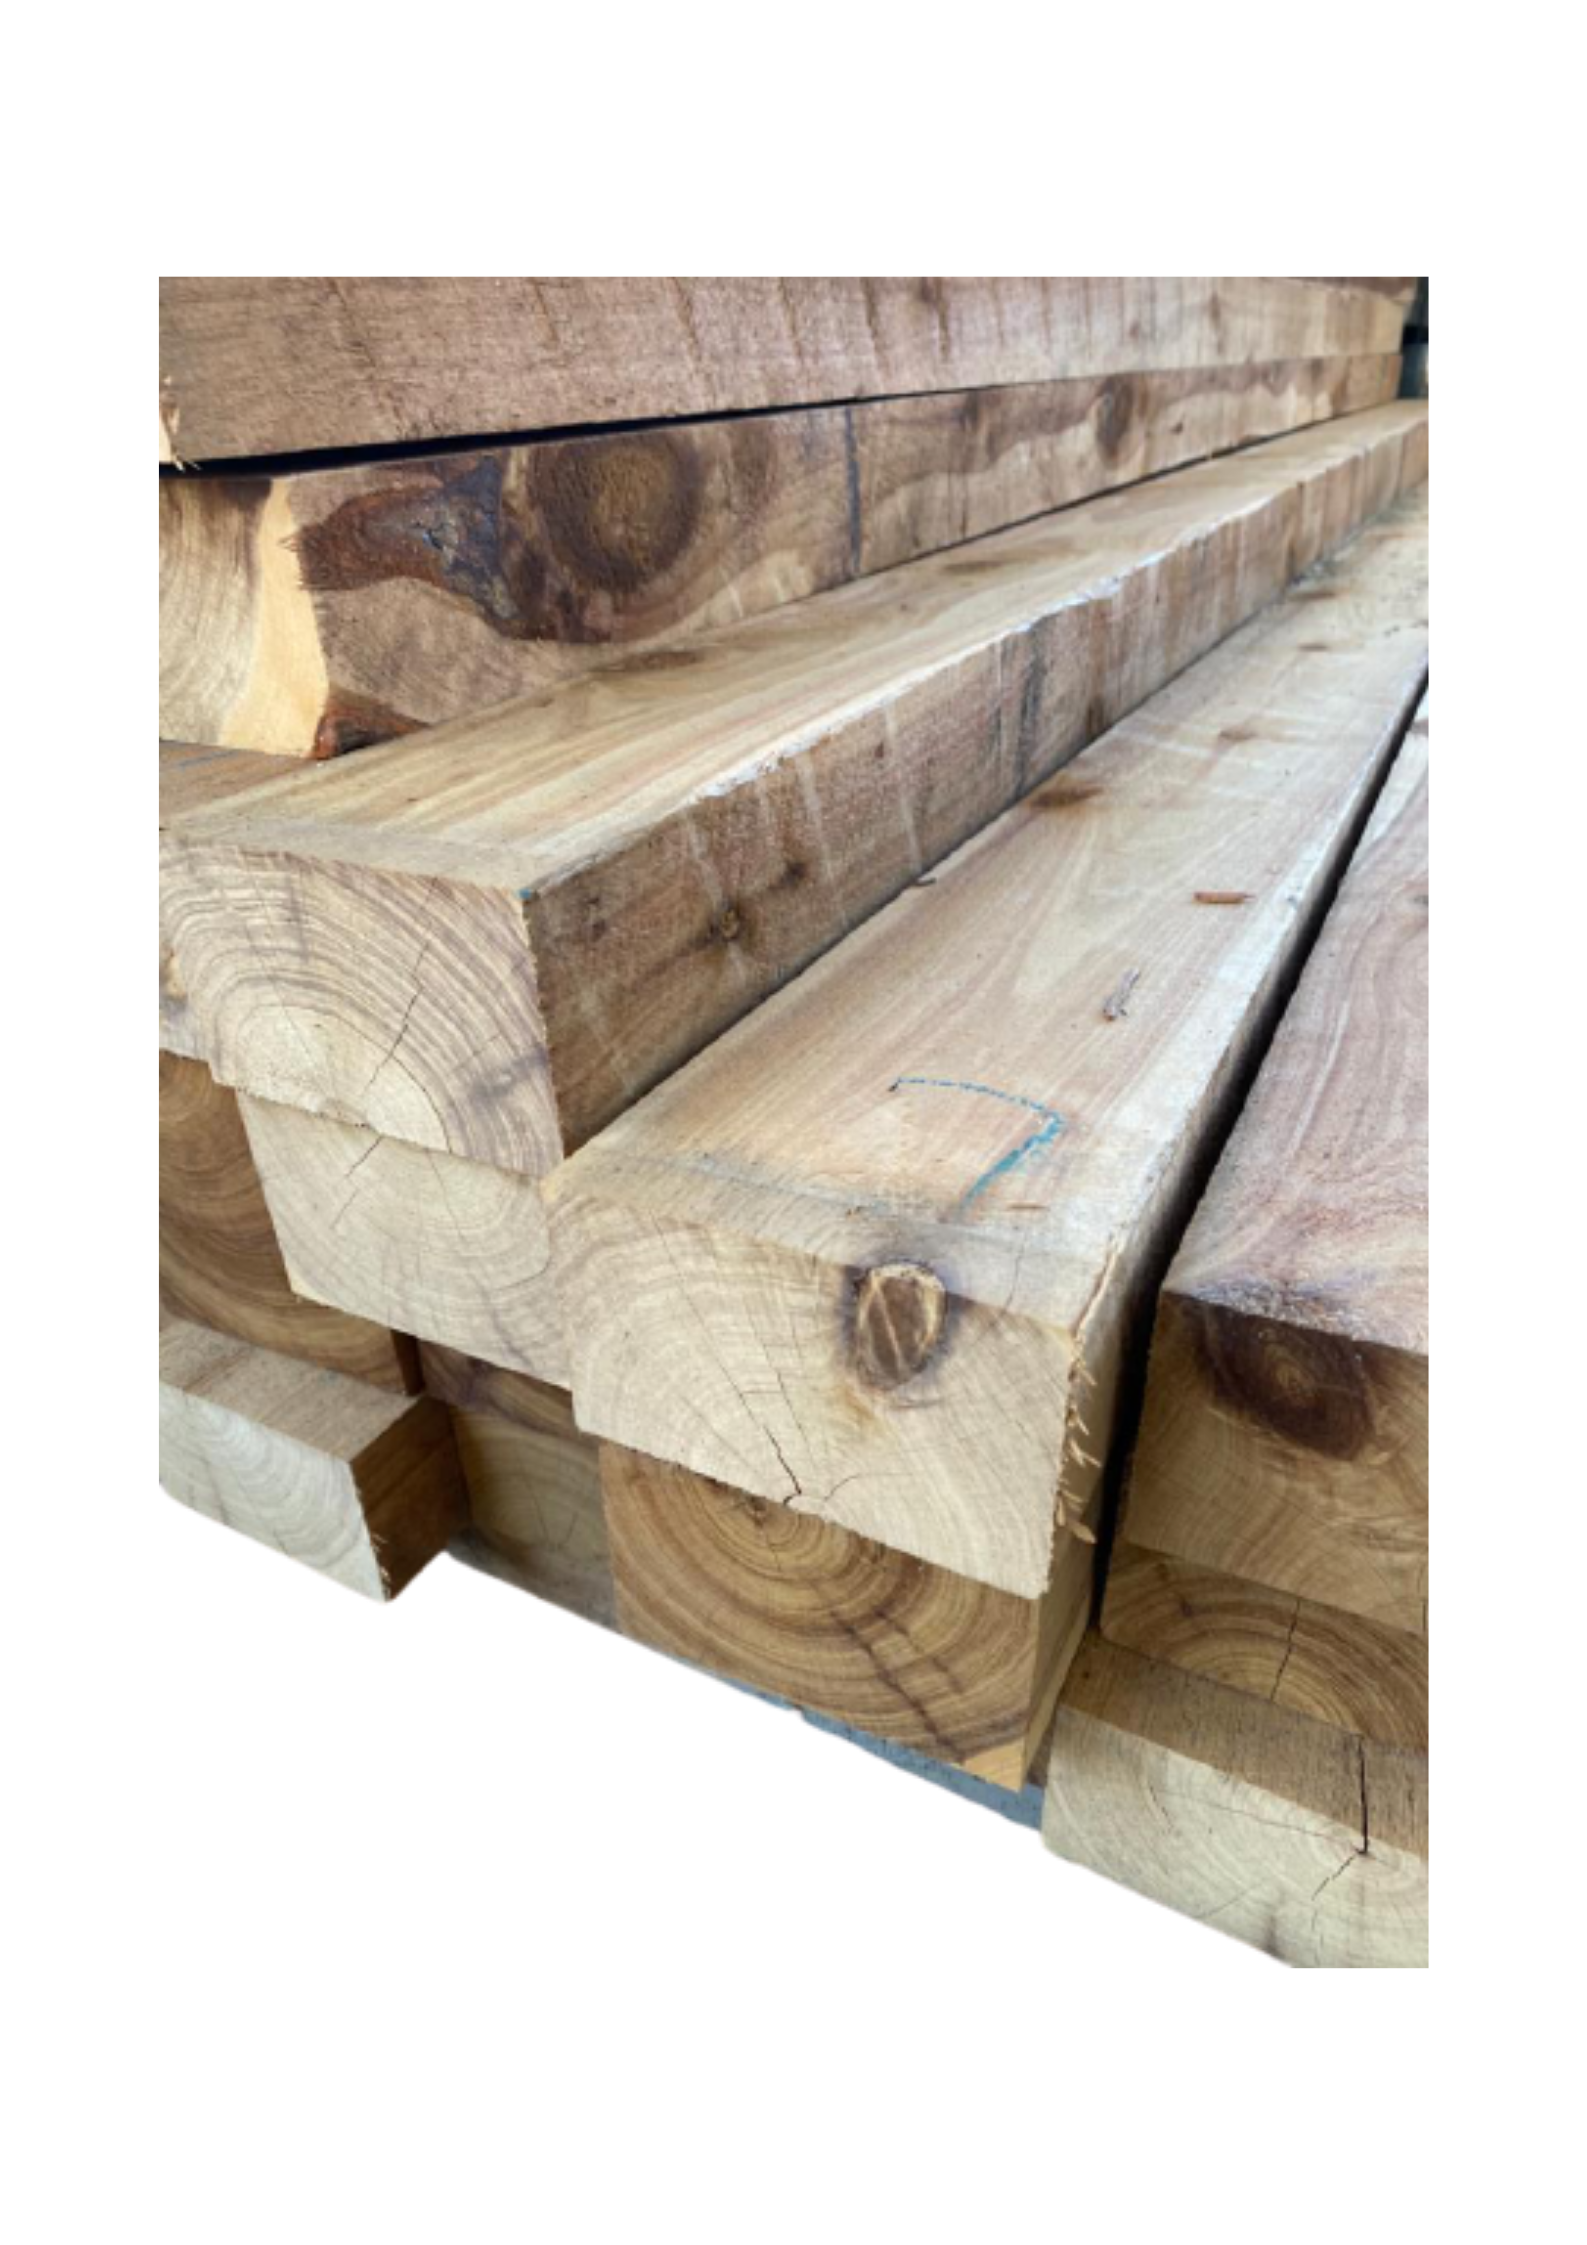 Treated Pine Fence Paling (Timber Fence)